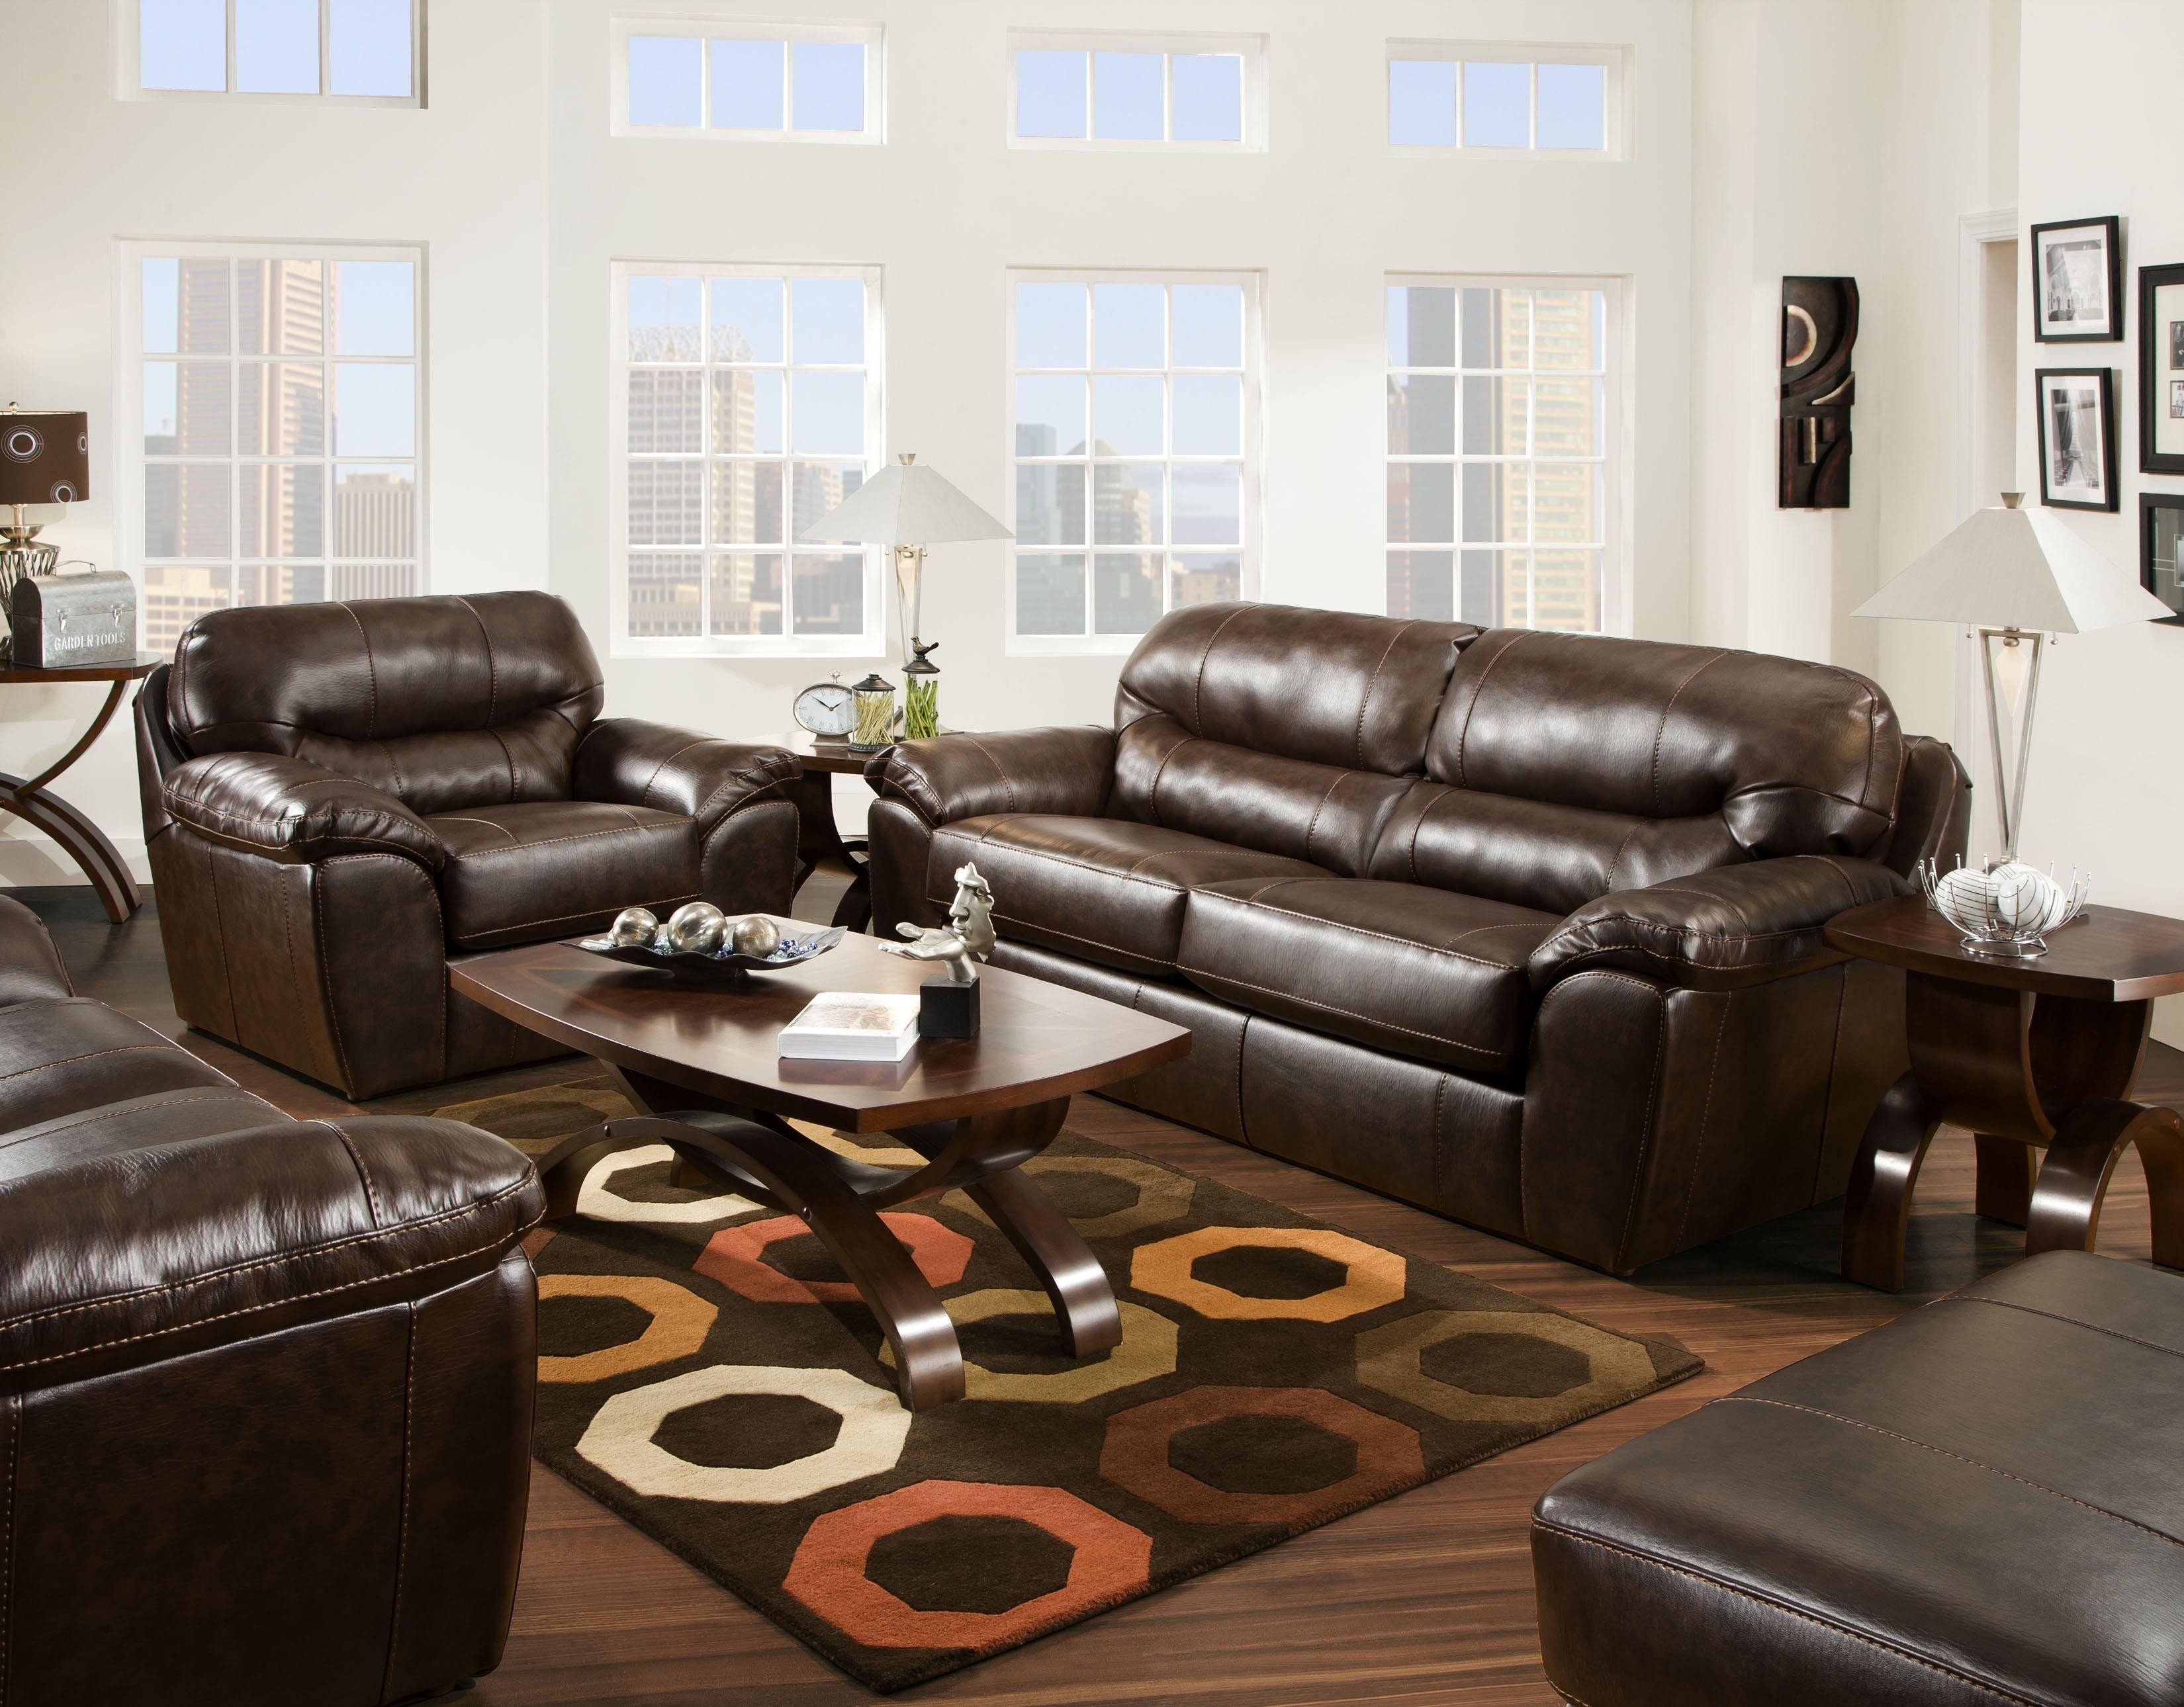 Casual Comfortable Living Room Jackson Furniture Brantley Casual and fortable Family